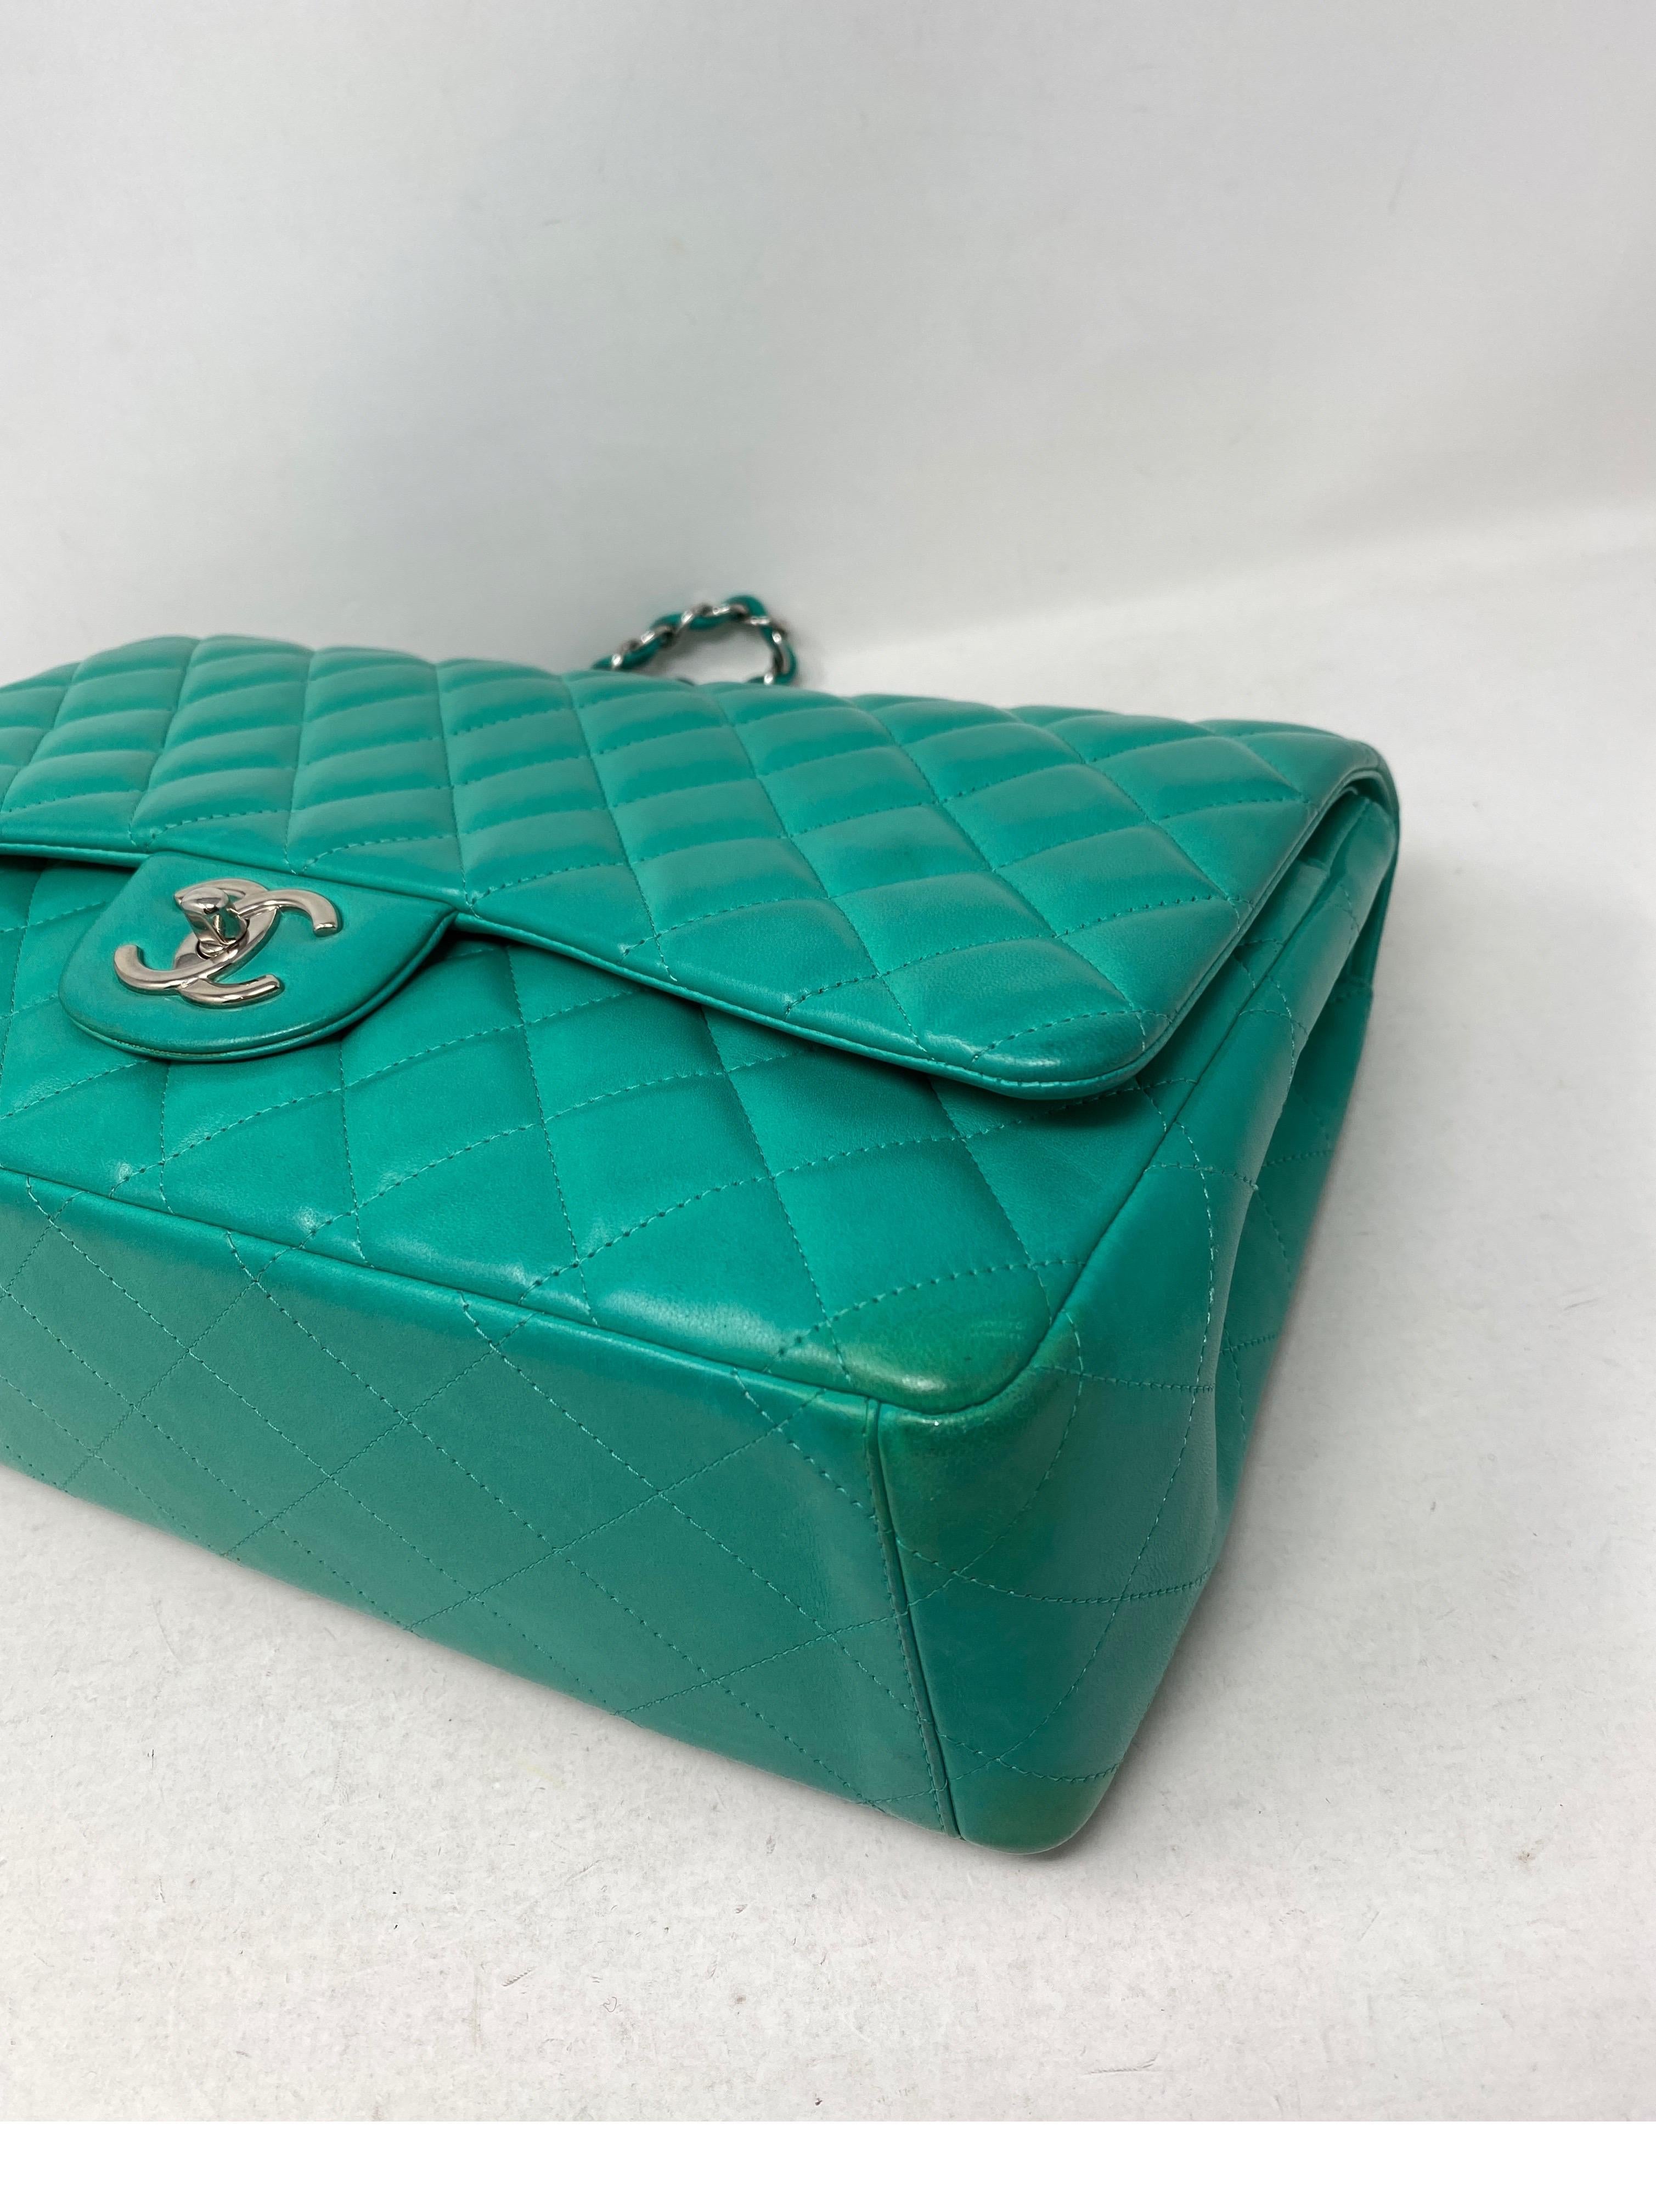 Chanel Teal Maxi Double Flap Bag 1